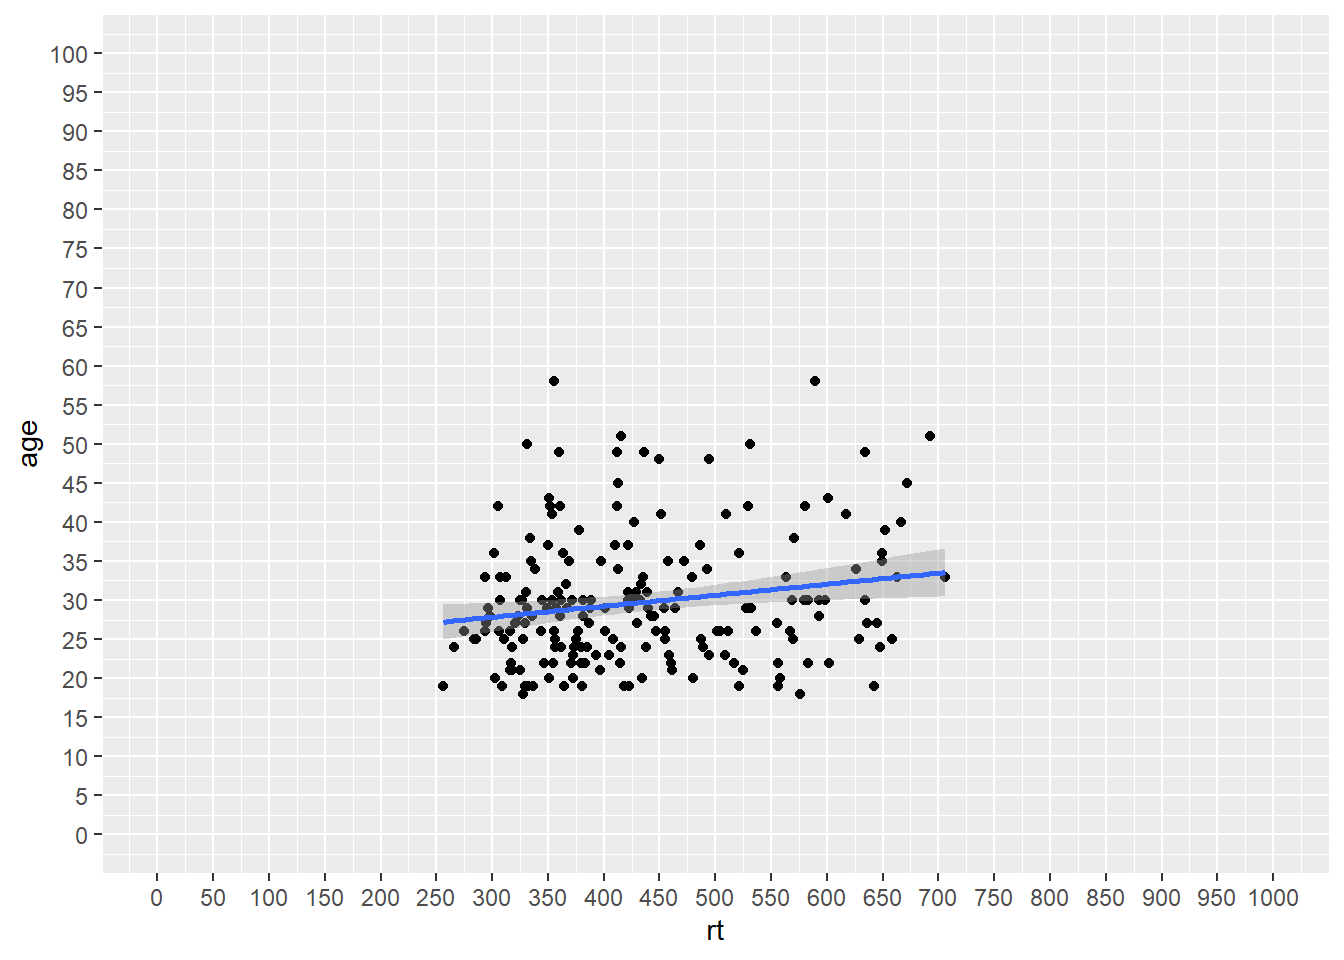 Changing the values on the axes using the seq() function